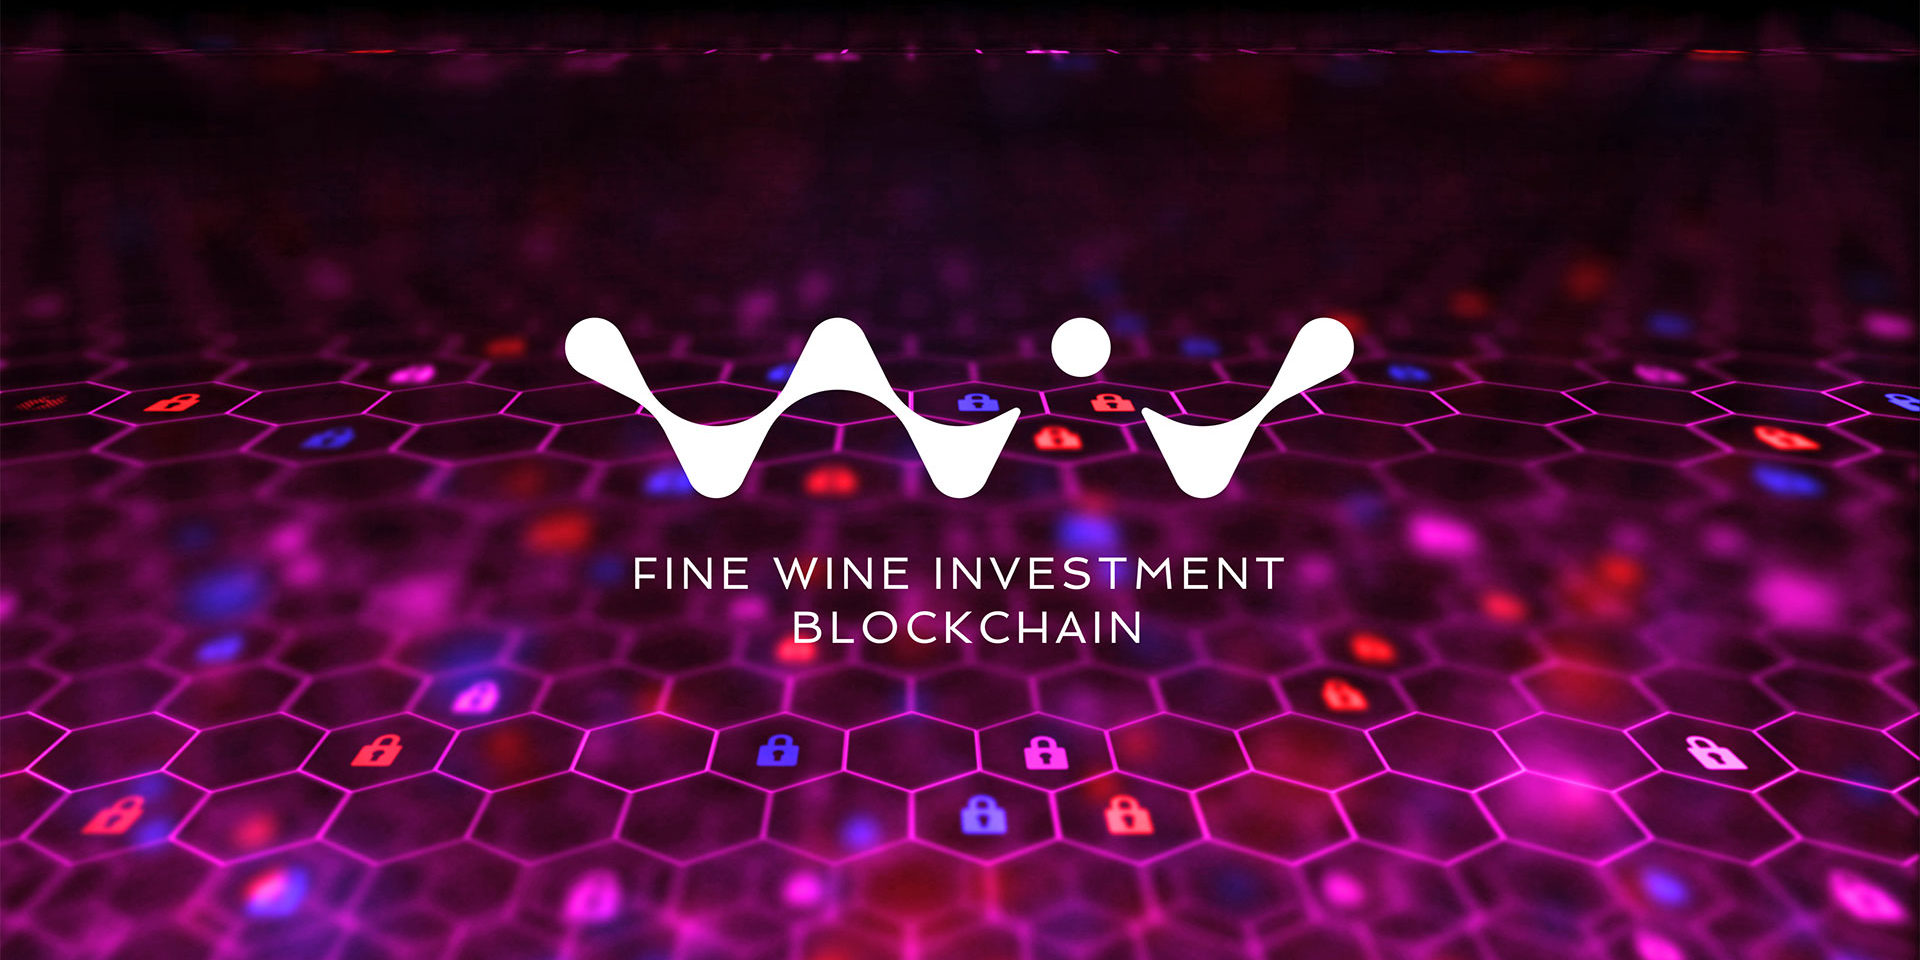 EY Helps WiV Technology Accelerate Fine Wine Investing with Blockchain